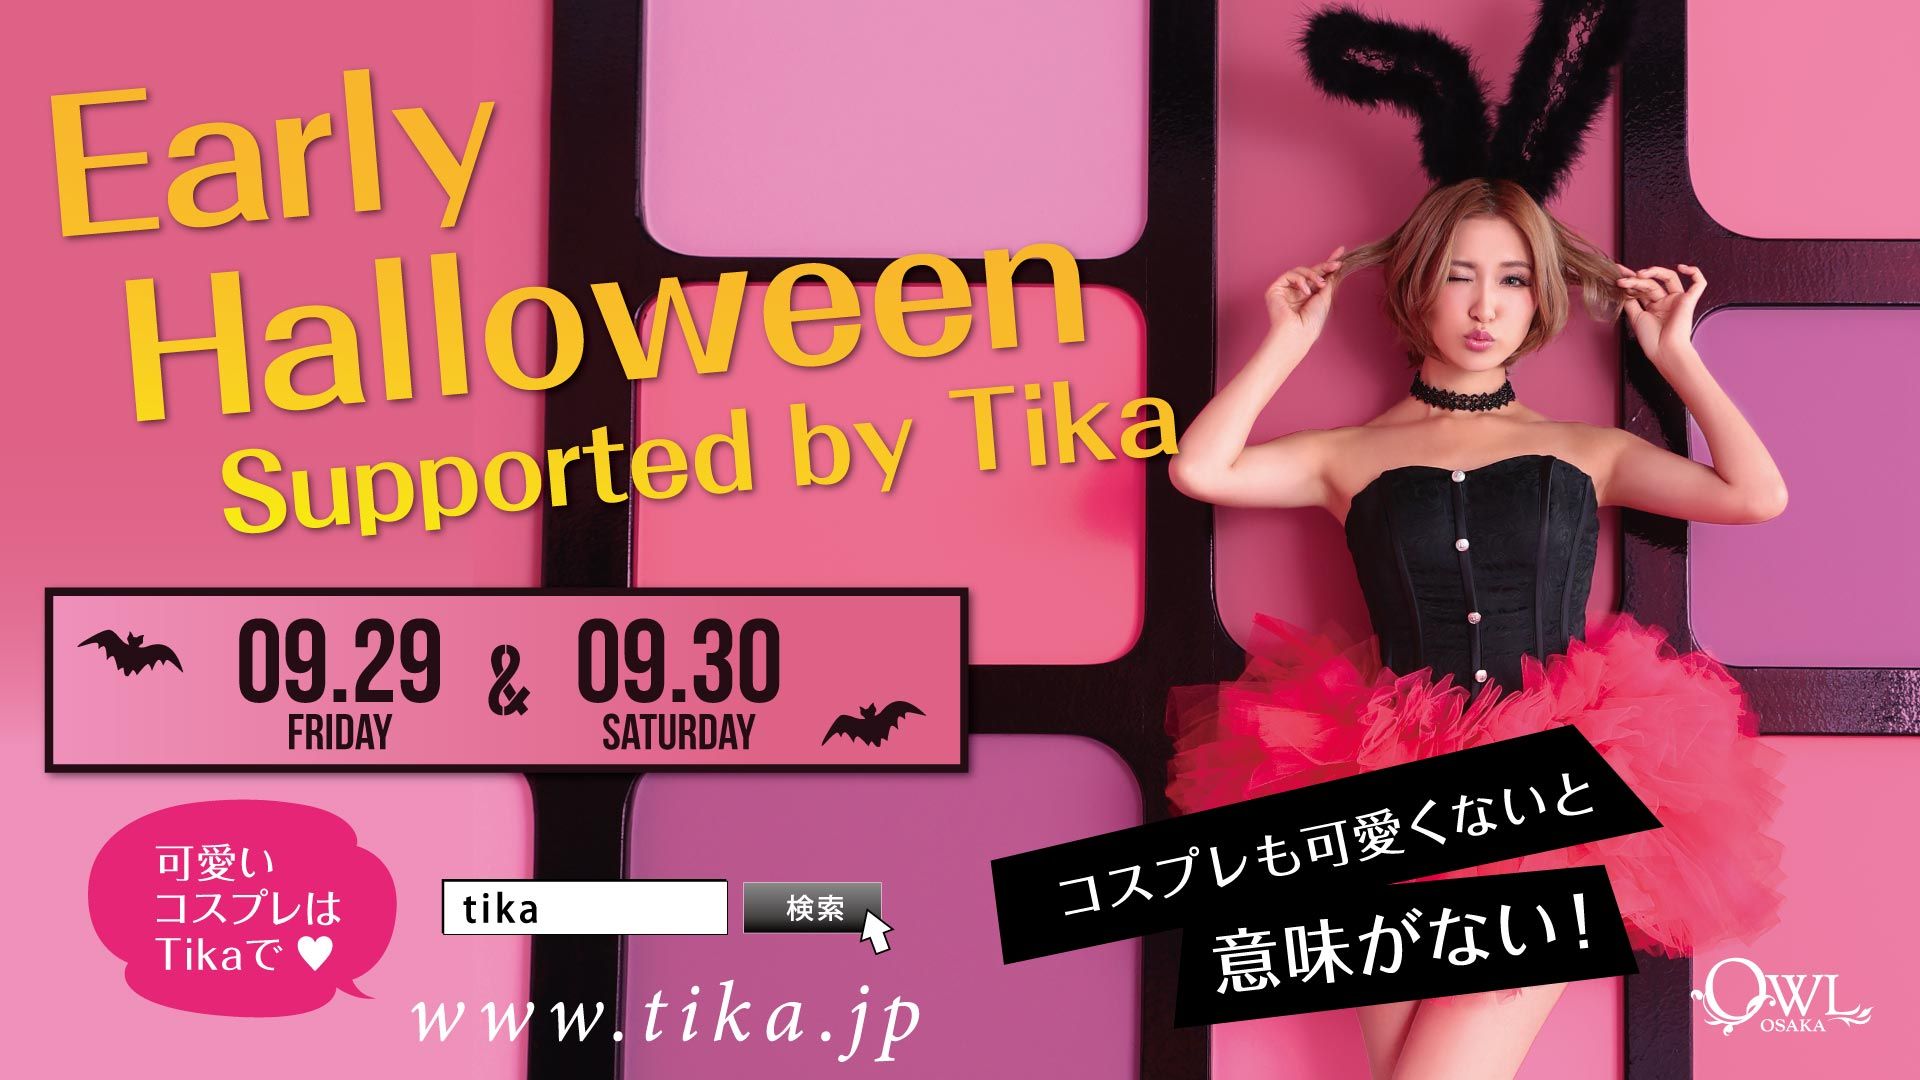 FINE NIGHT -PREMIUM FRIDAY- / Early Halloween Supported by Tika